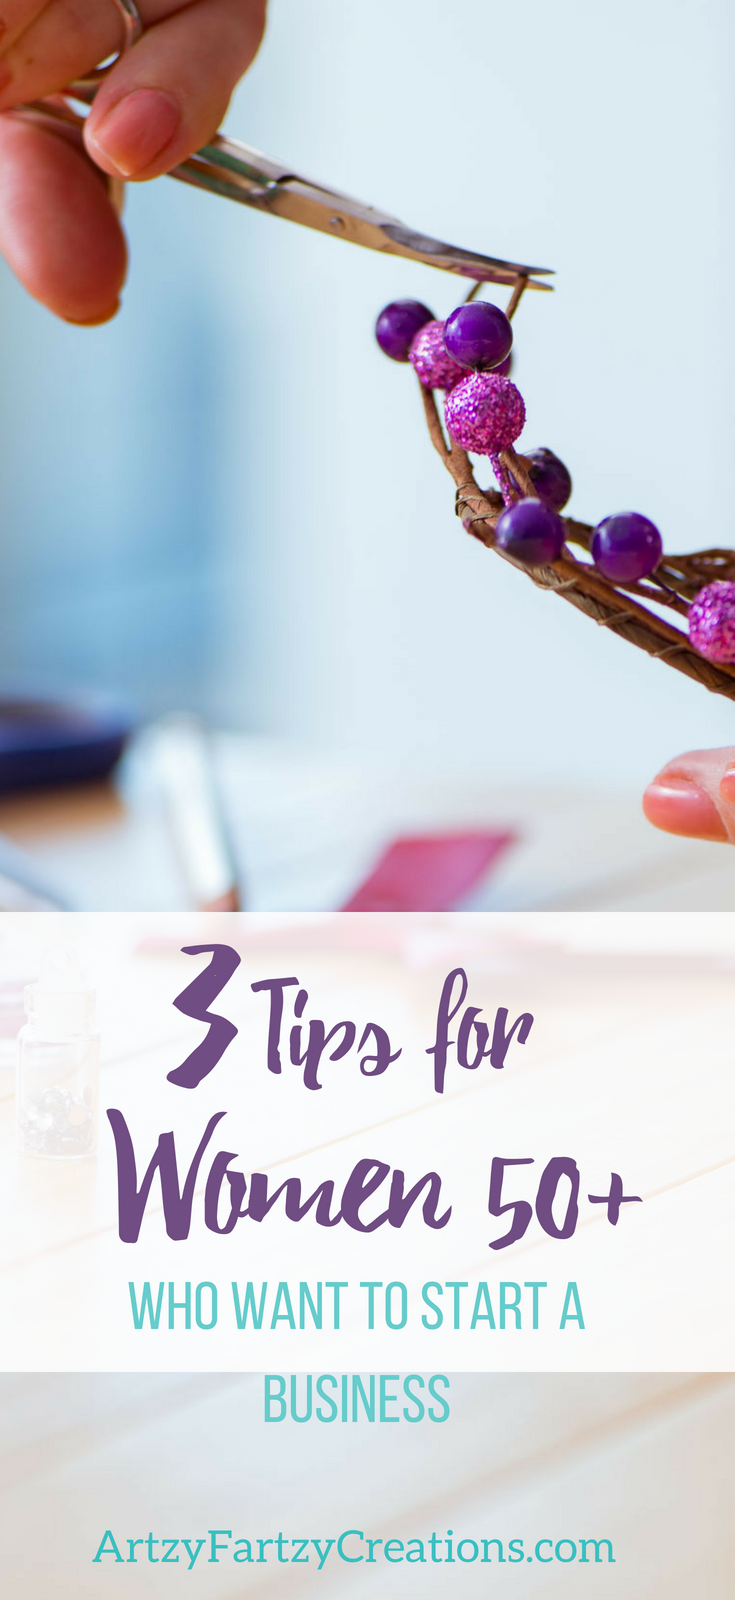 3 Tips for Women Who Want to Start a Business